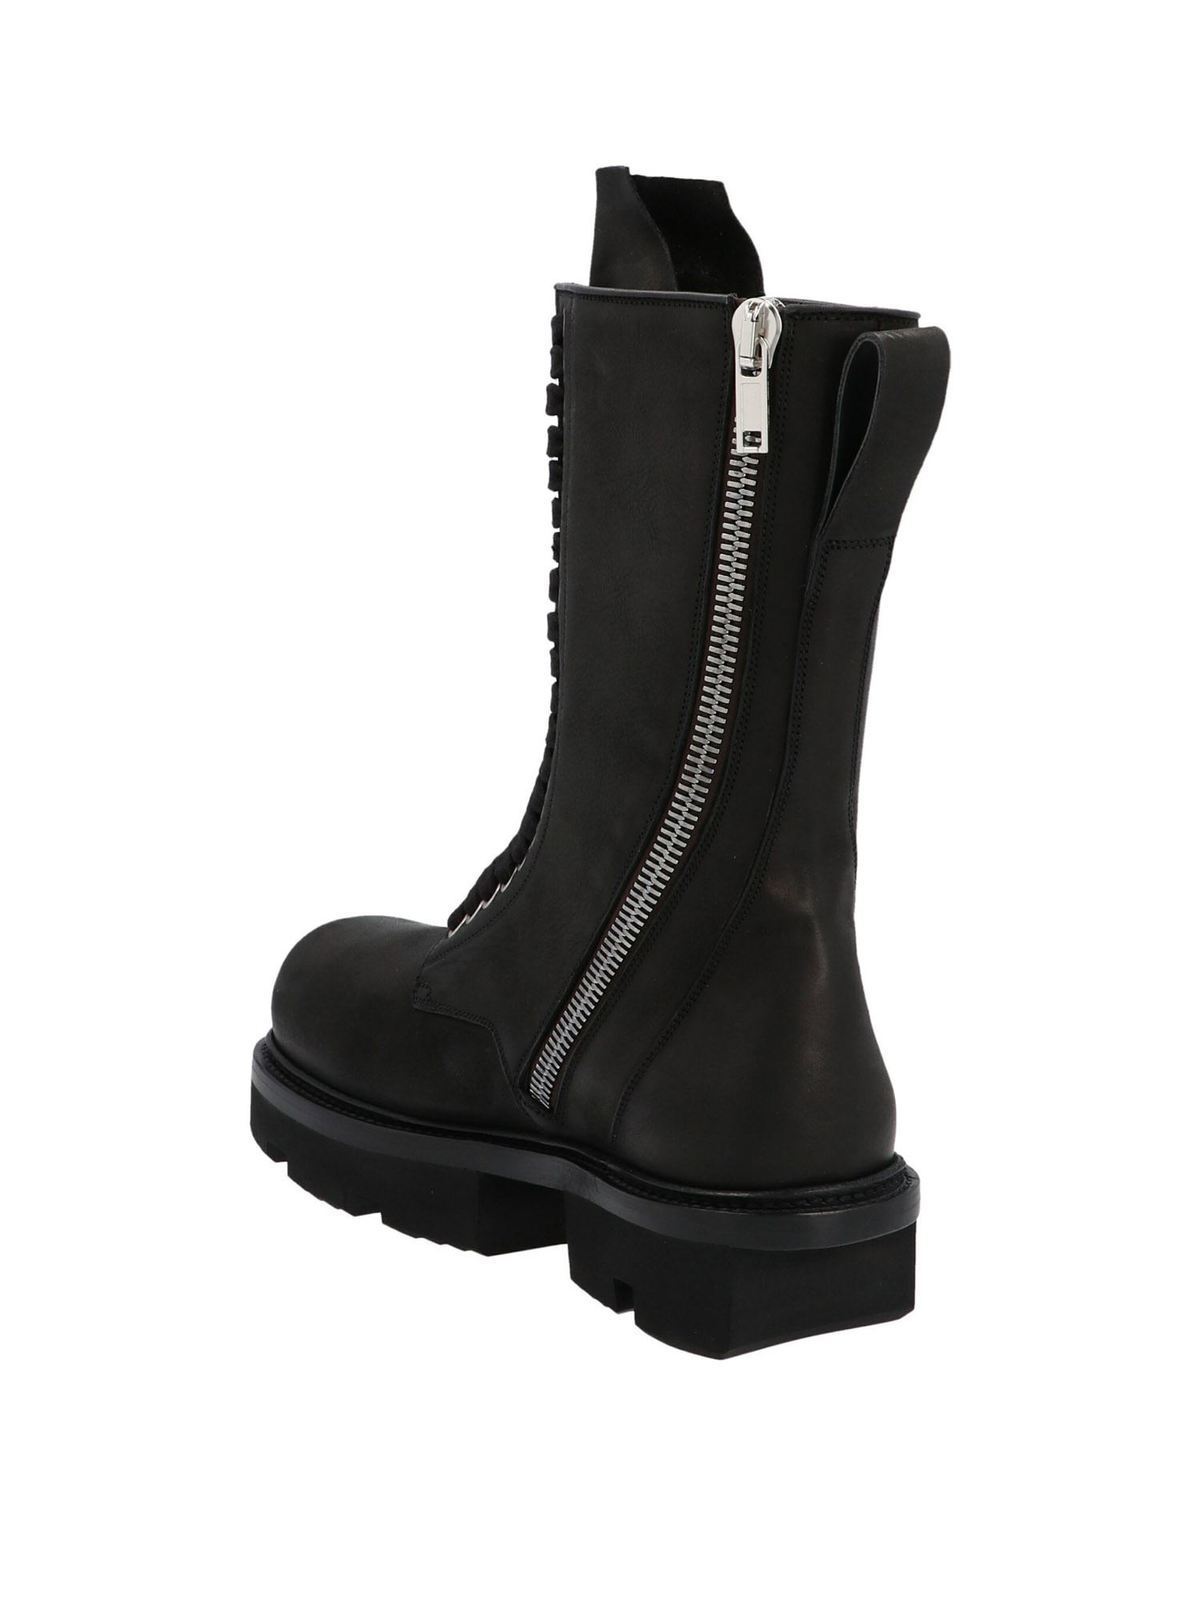 Army Bozo Megatooth boots in black